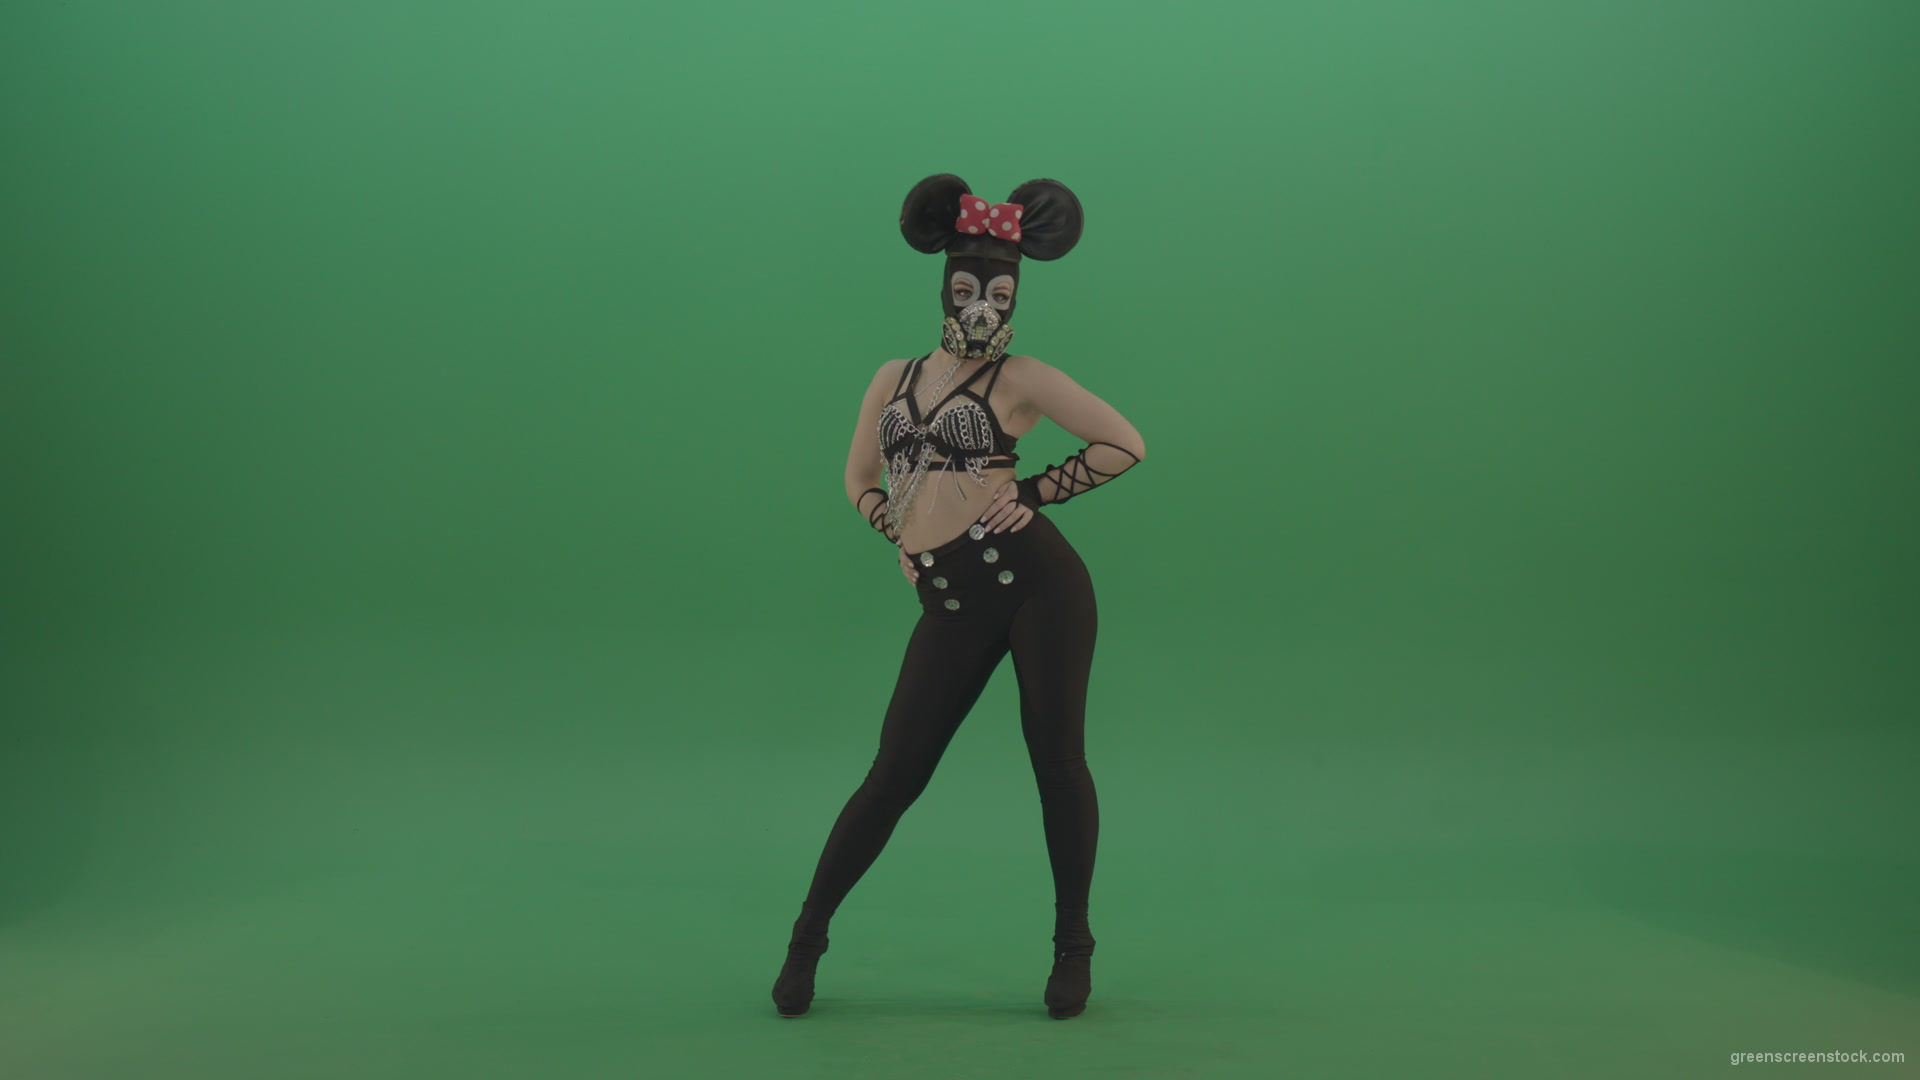 Mouse-Girl-in-mask-dancing-go-go-shaking-ass-and-posing-on-green-screen_007 Green Screen Stock